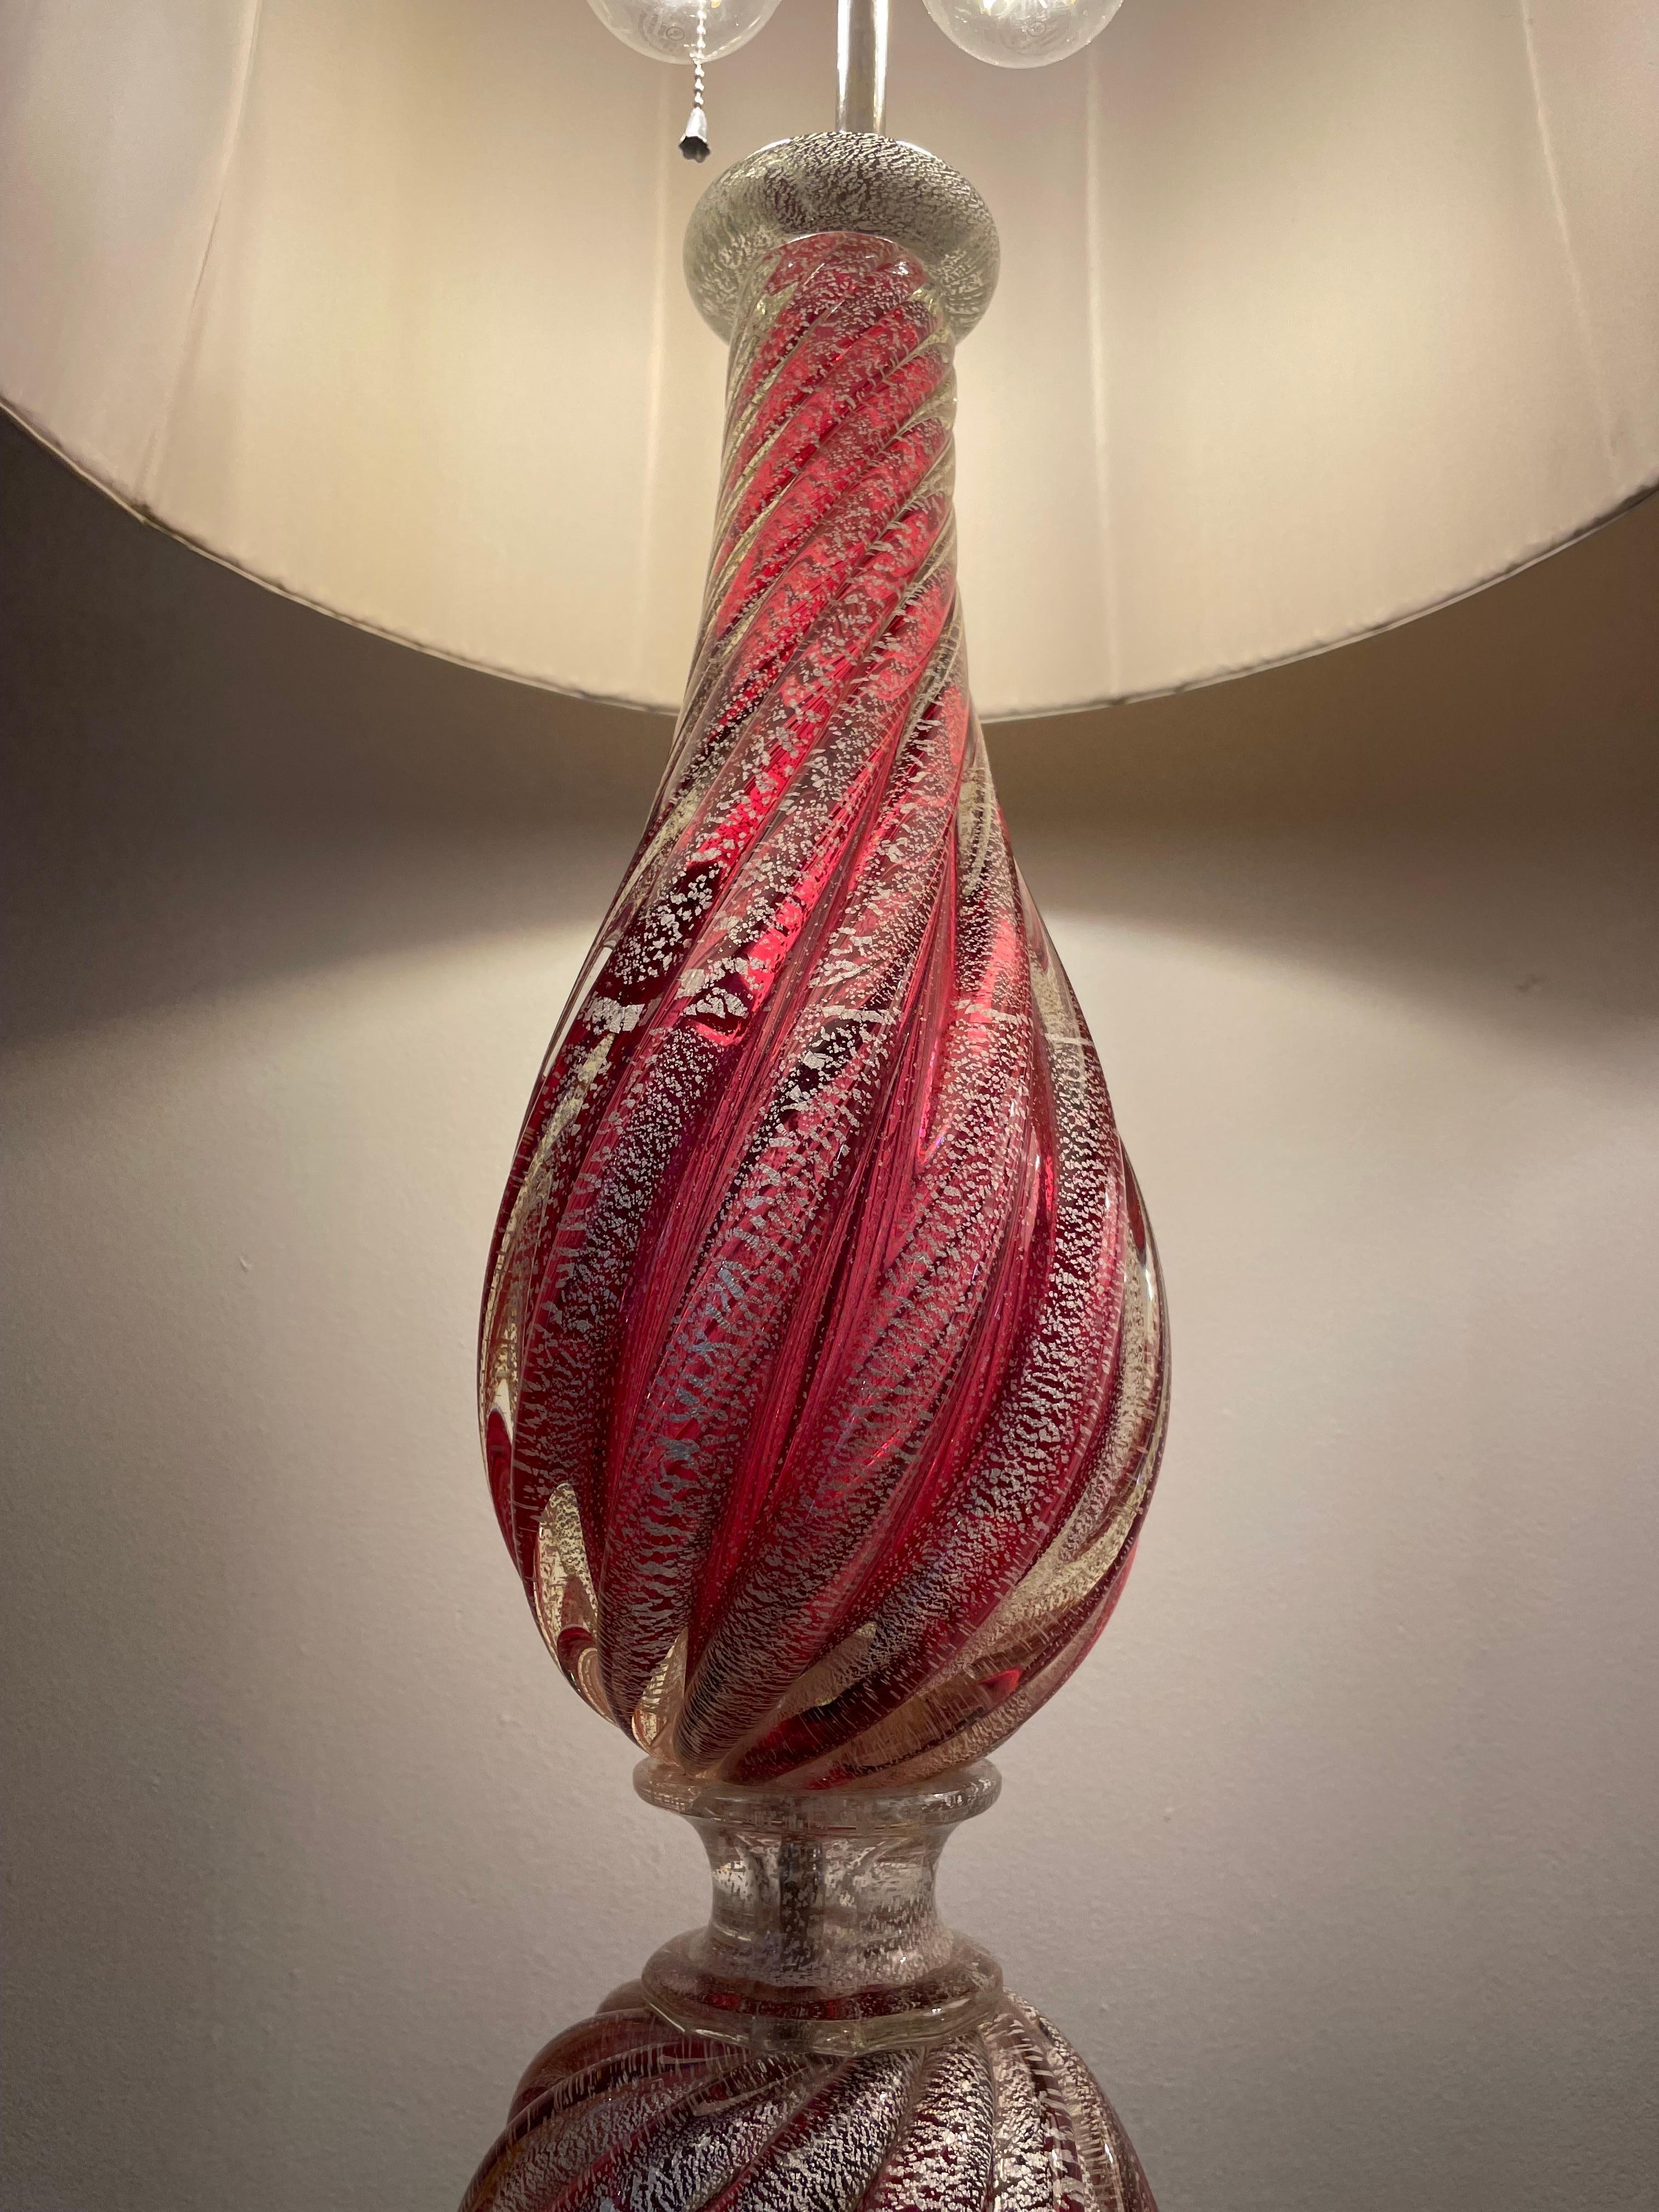 Oversized Raspberry Murano Glass Lamps W/ Silver Foil Inclusions by Barovier For Sale 6